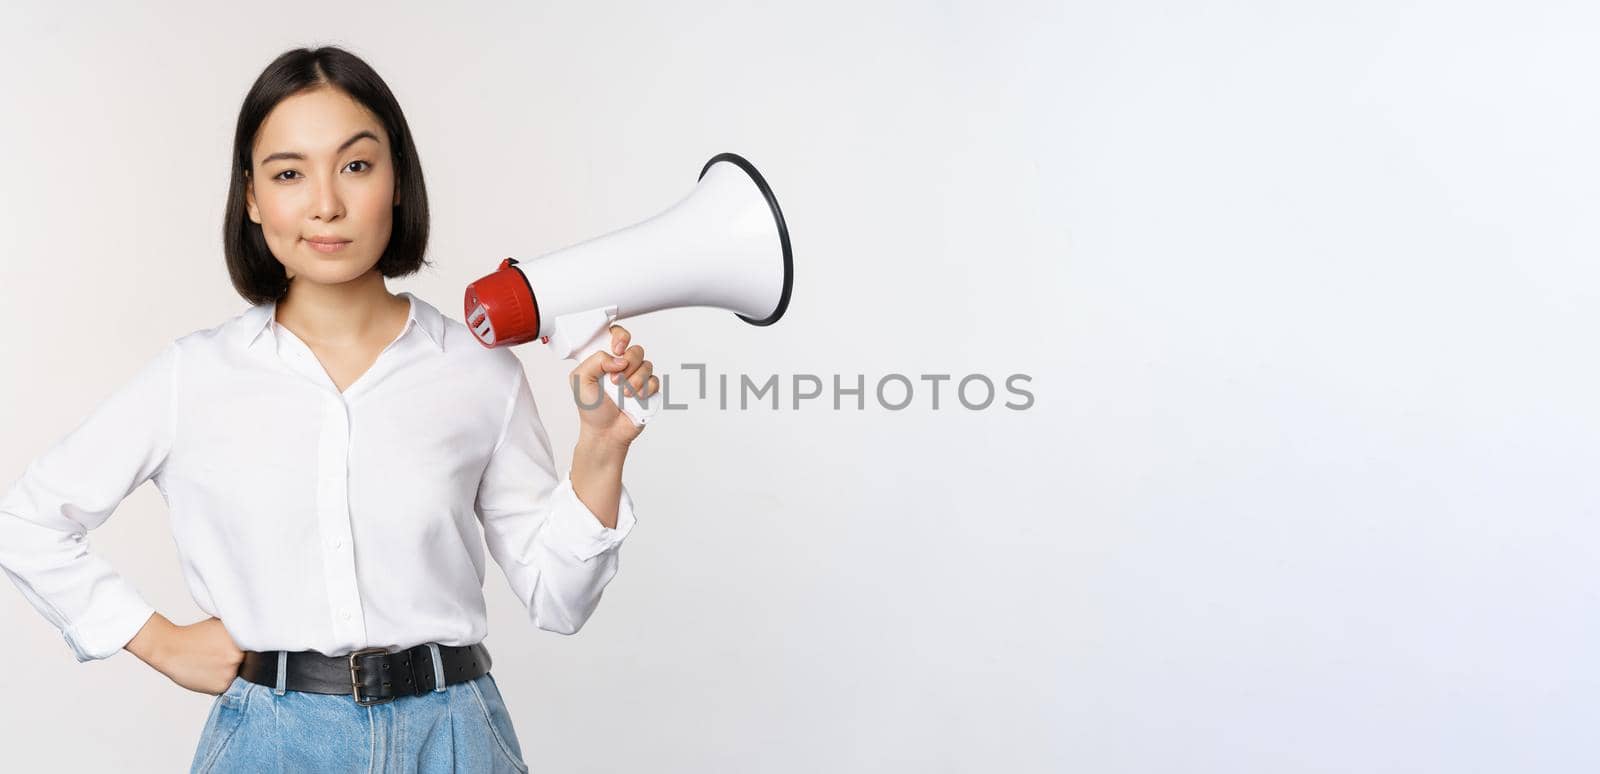 Image of modern asian woman with megaphone, making announcement, white background.